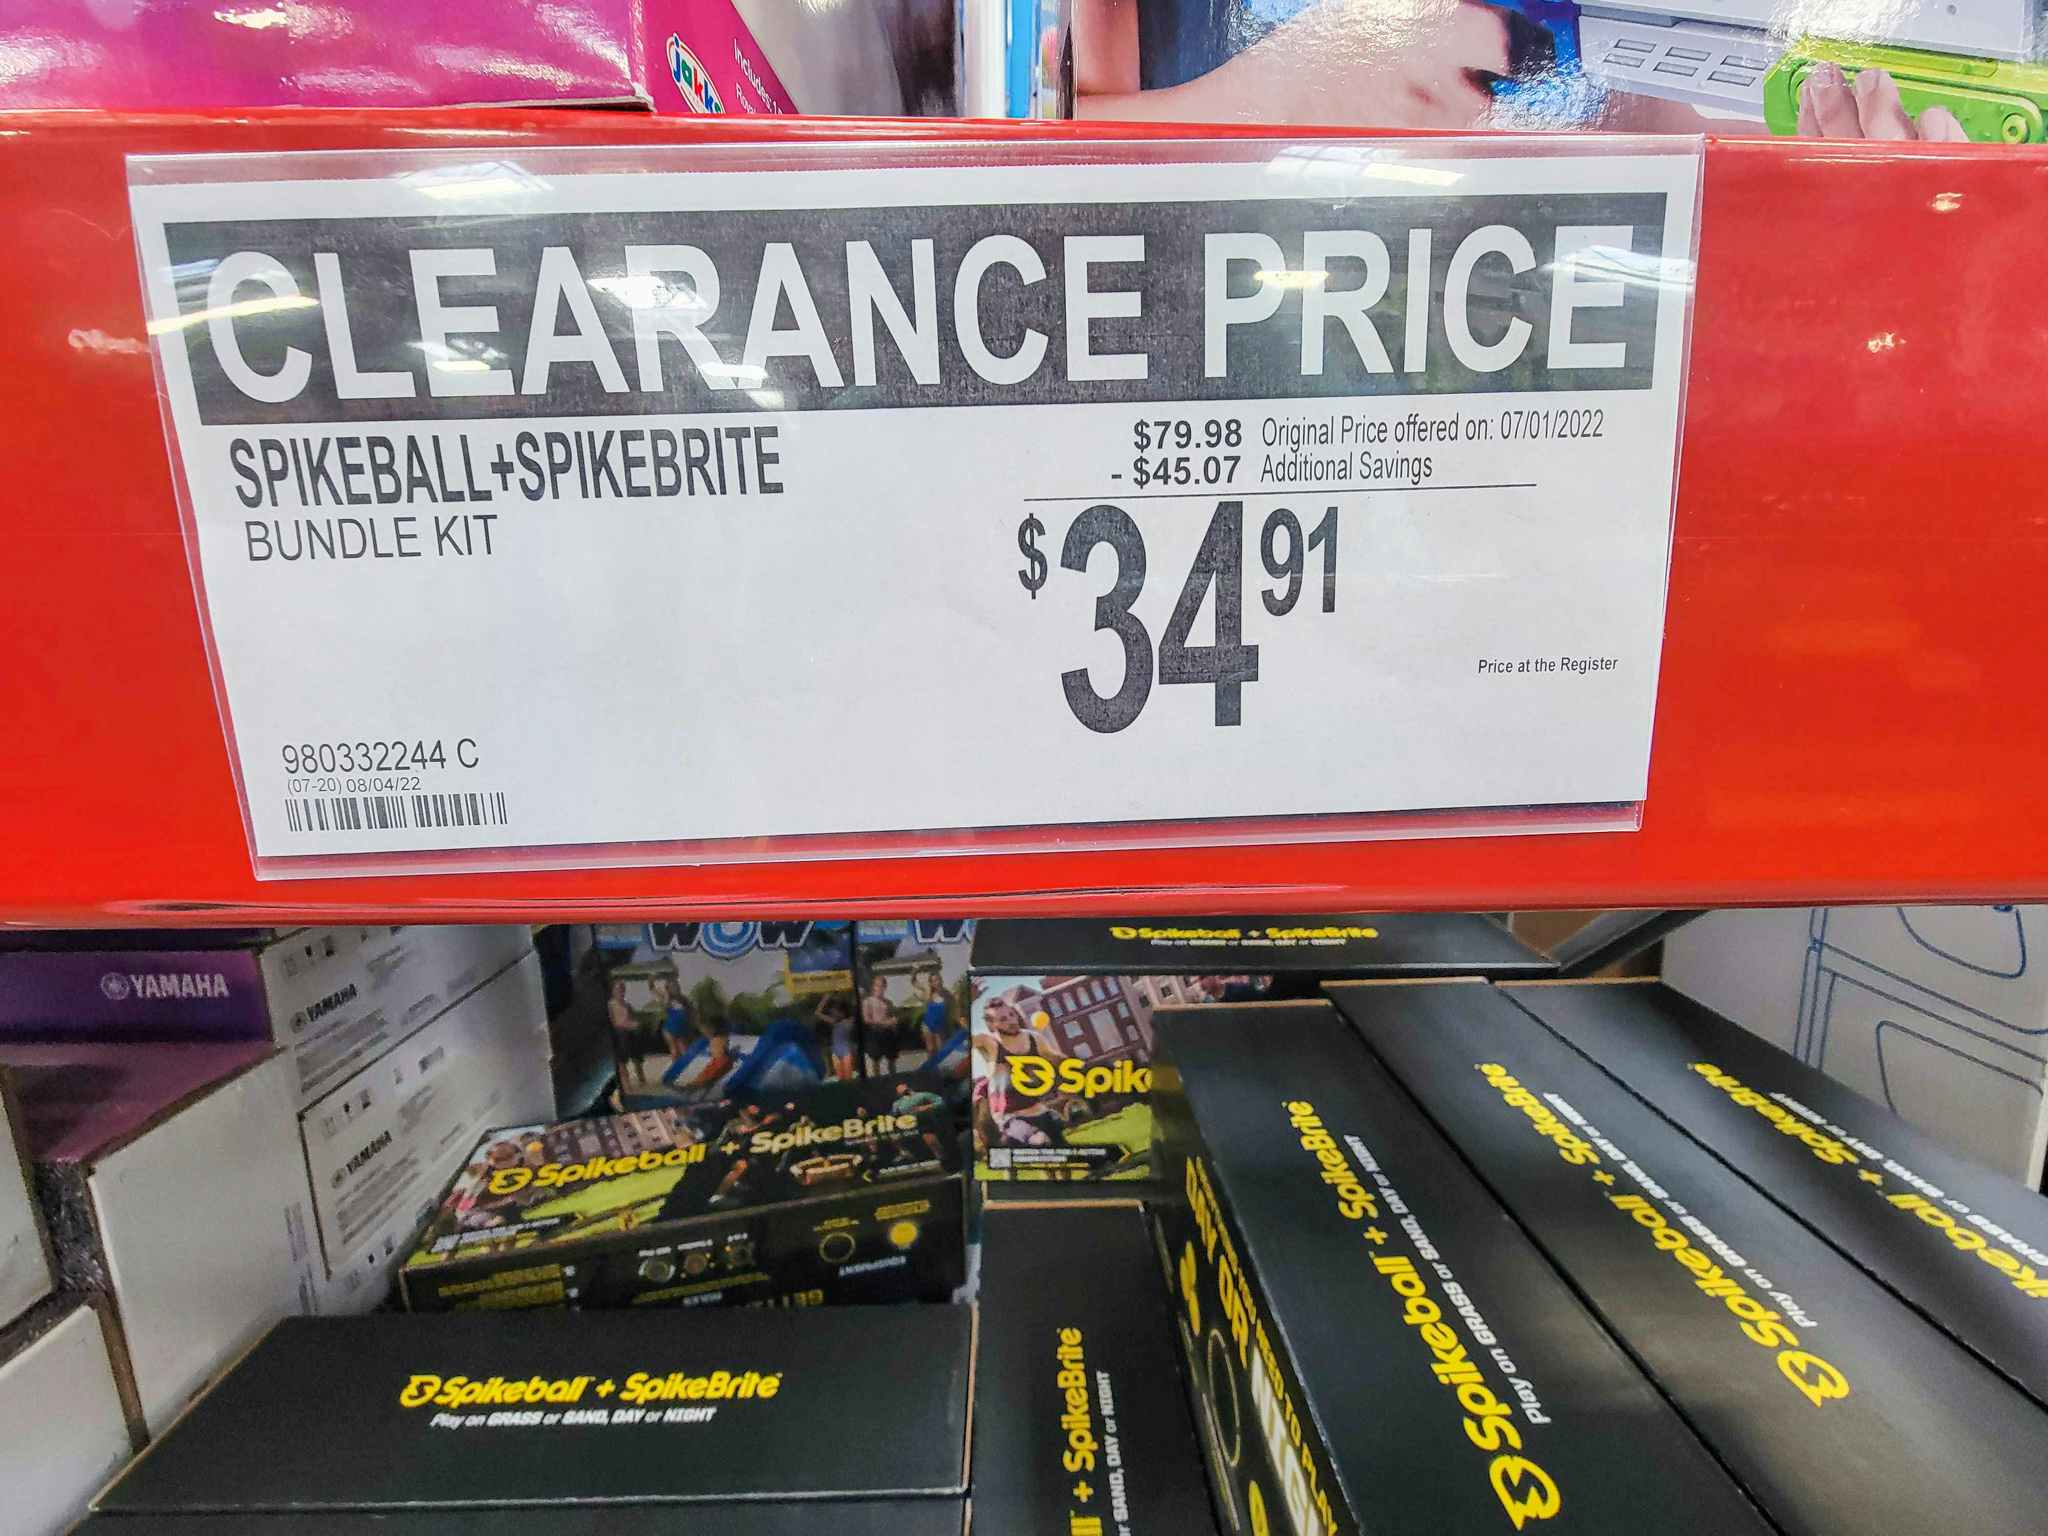 clearance sign for spikeball and spikebrite bundle for $34.91